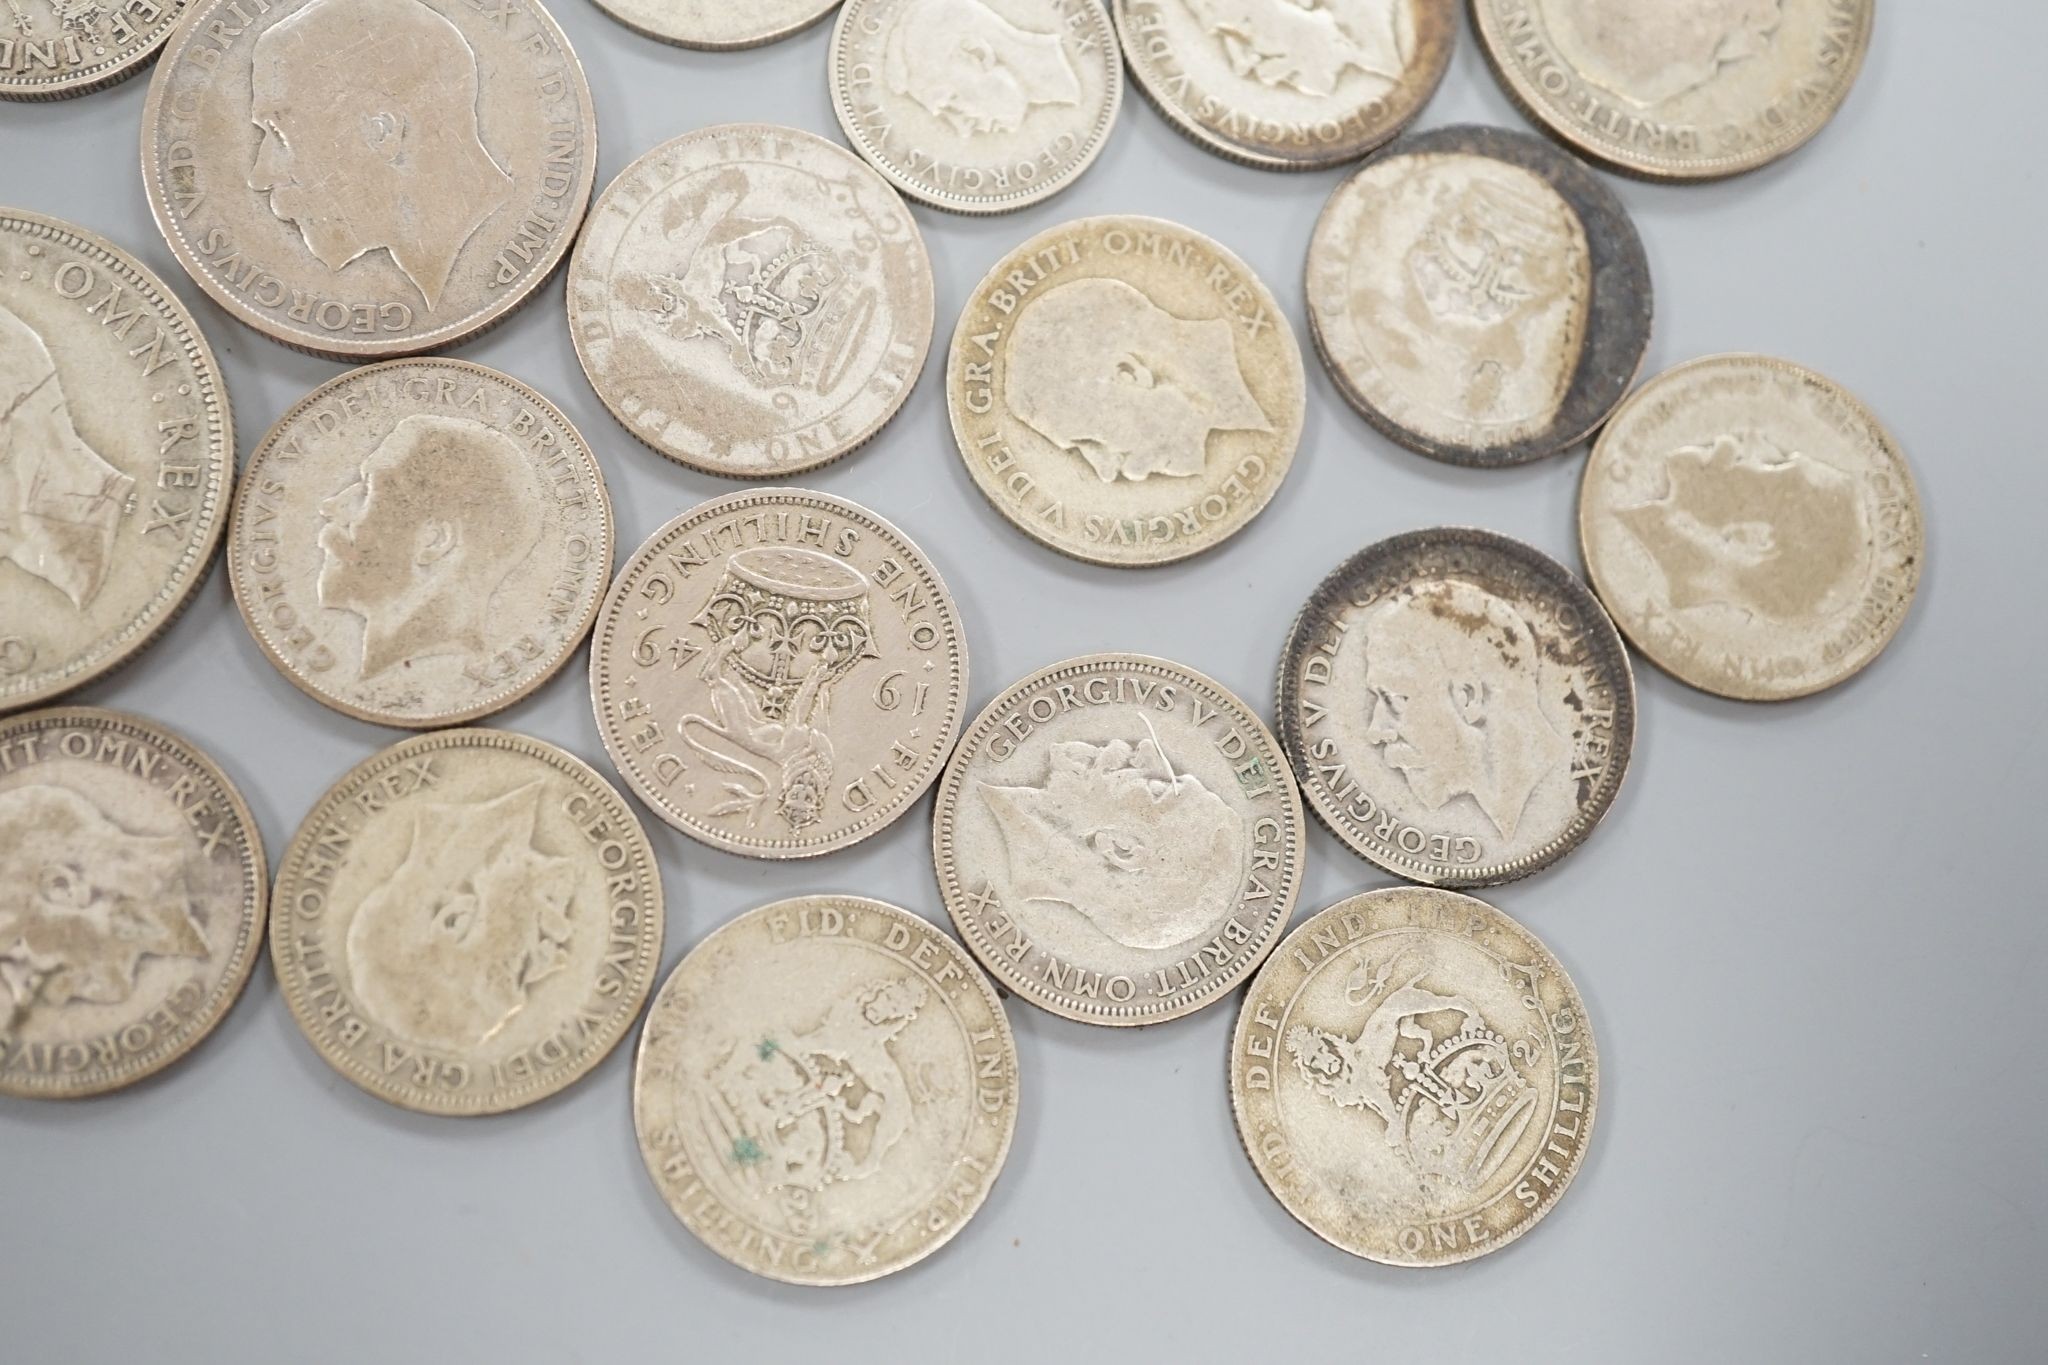 A group of George V and later coins